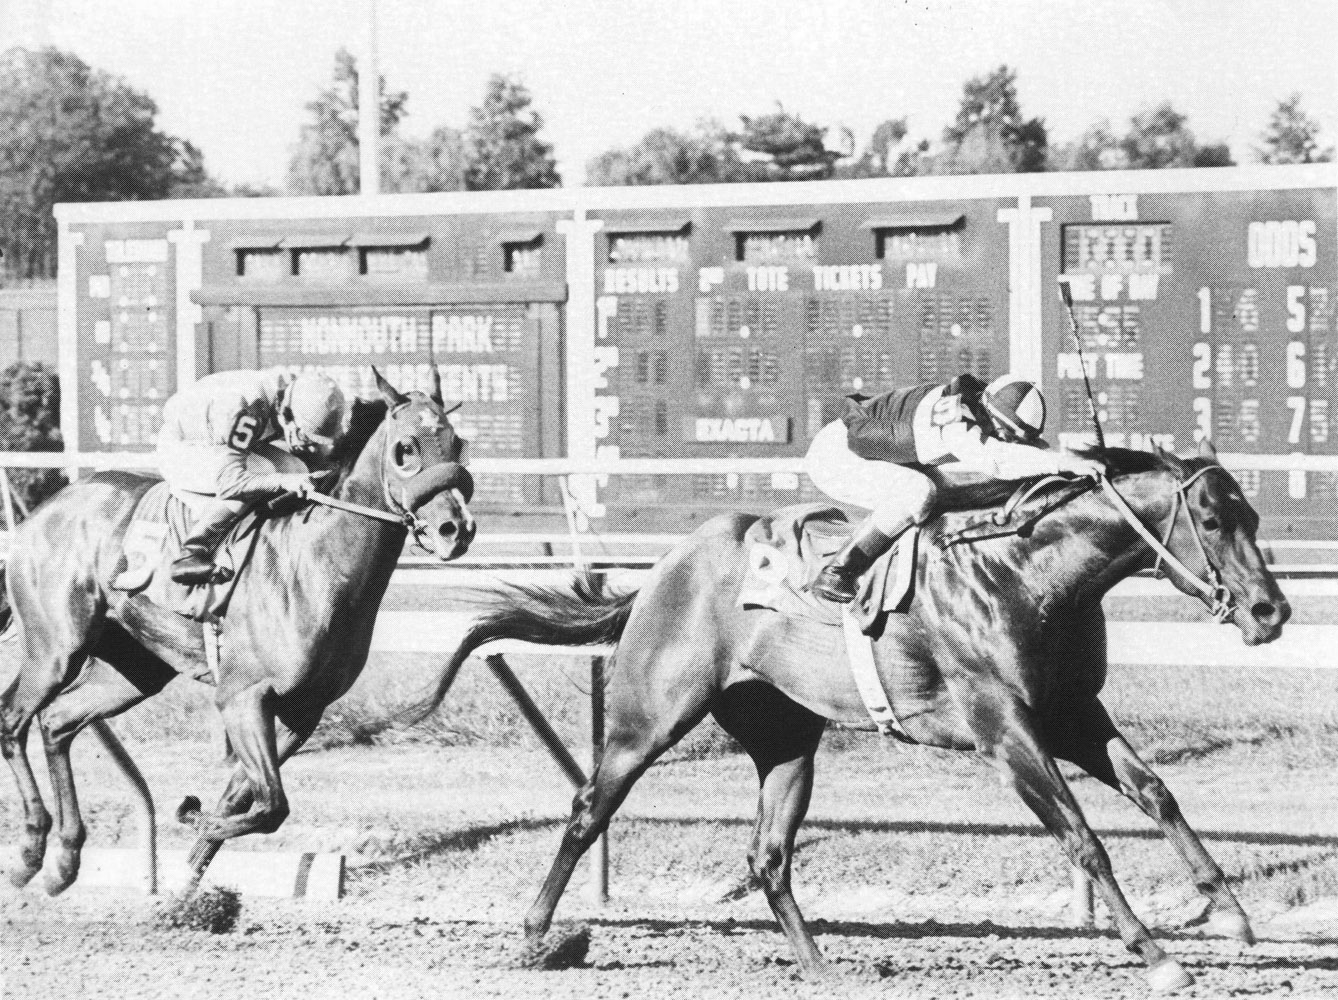 Foolish Pleasure (Jacinto Vasquez up) winning the 1974 Sapling Stakes at Monmouth Park (Museum Collection)